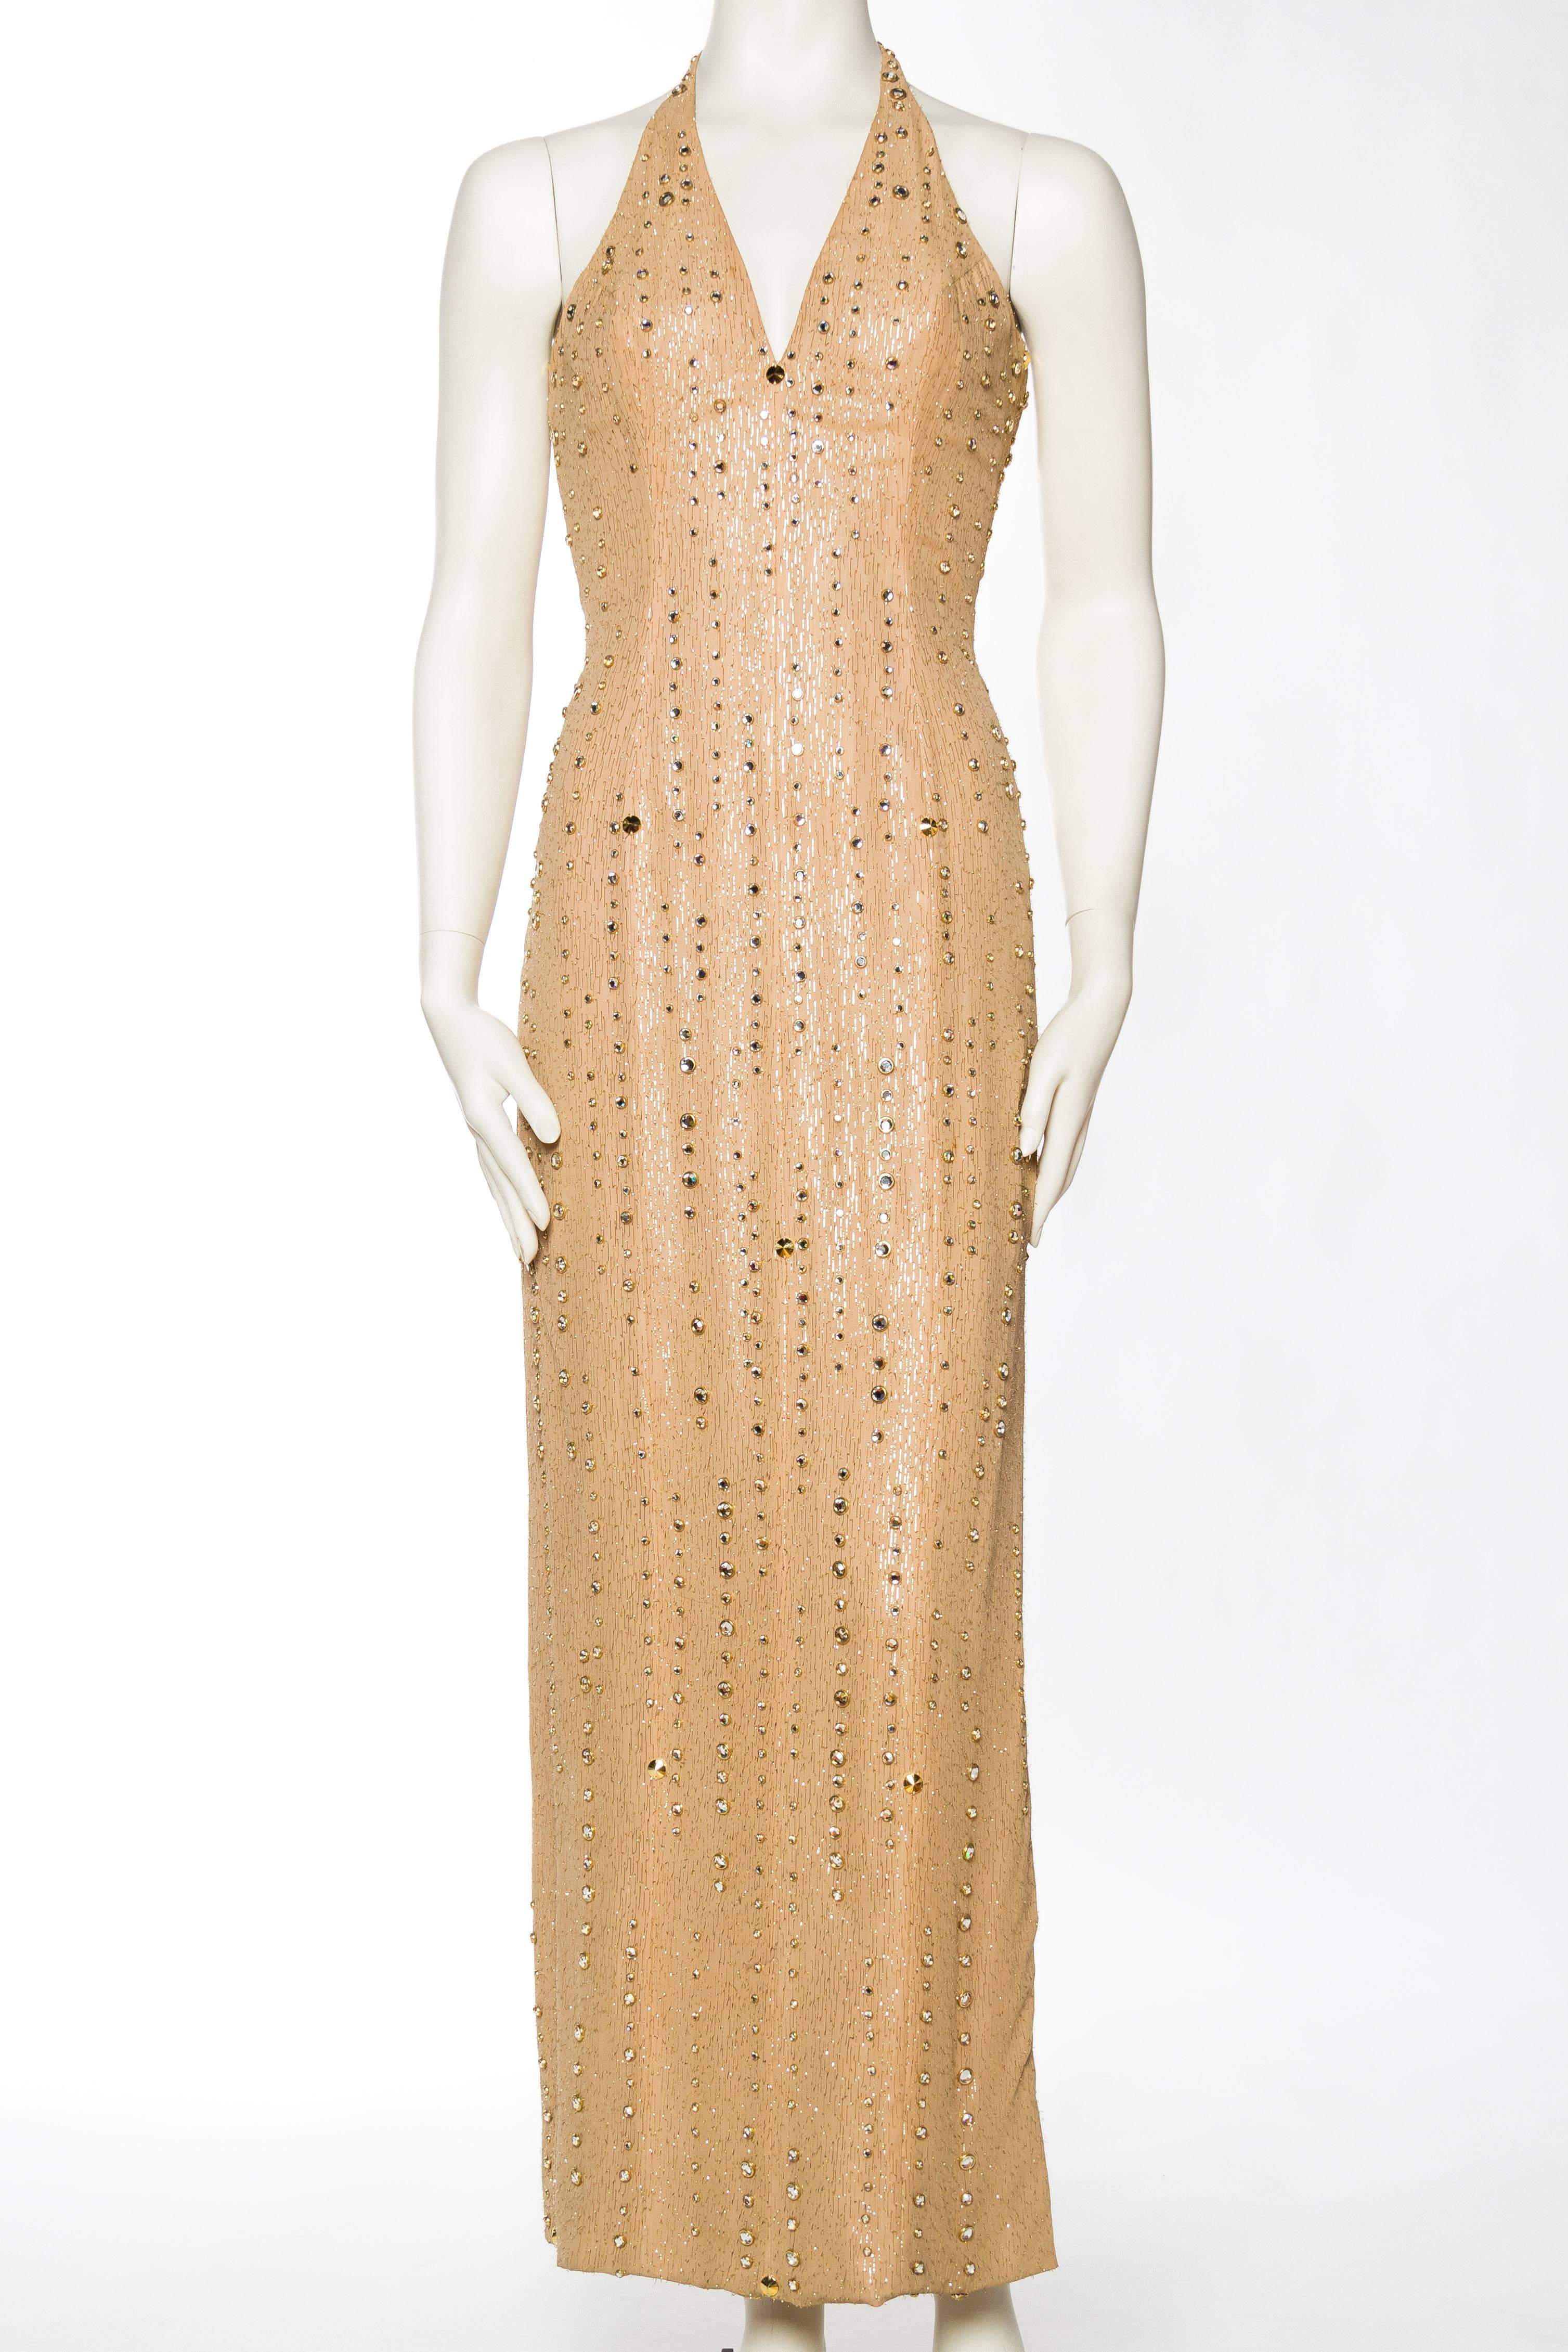 1970s Nude & Gold Halter Gown with Studs and Crystals